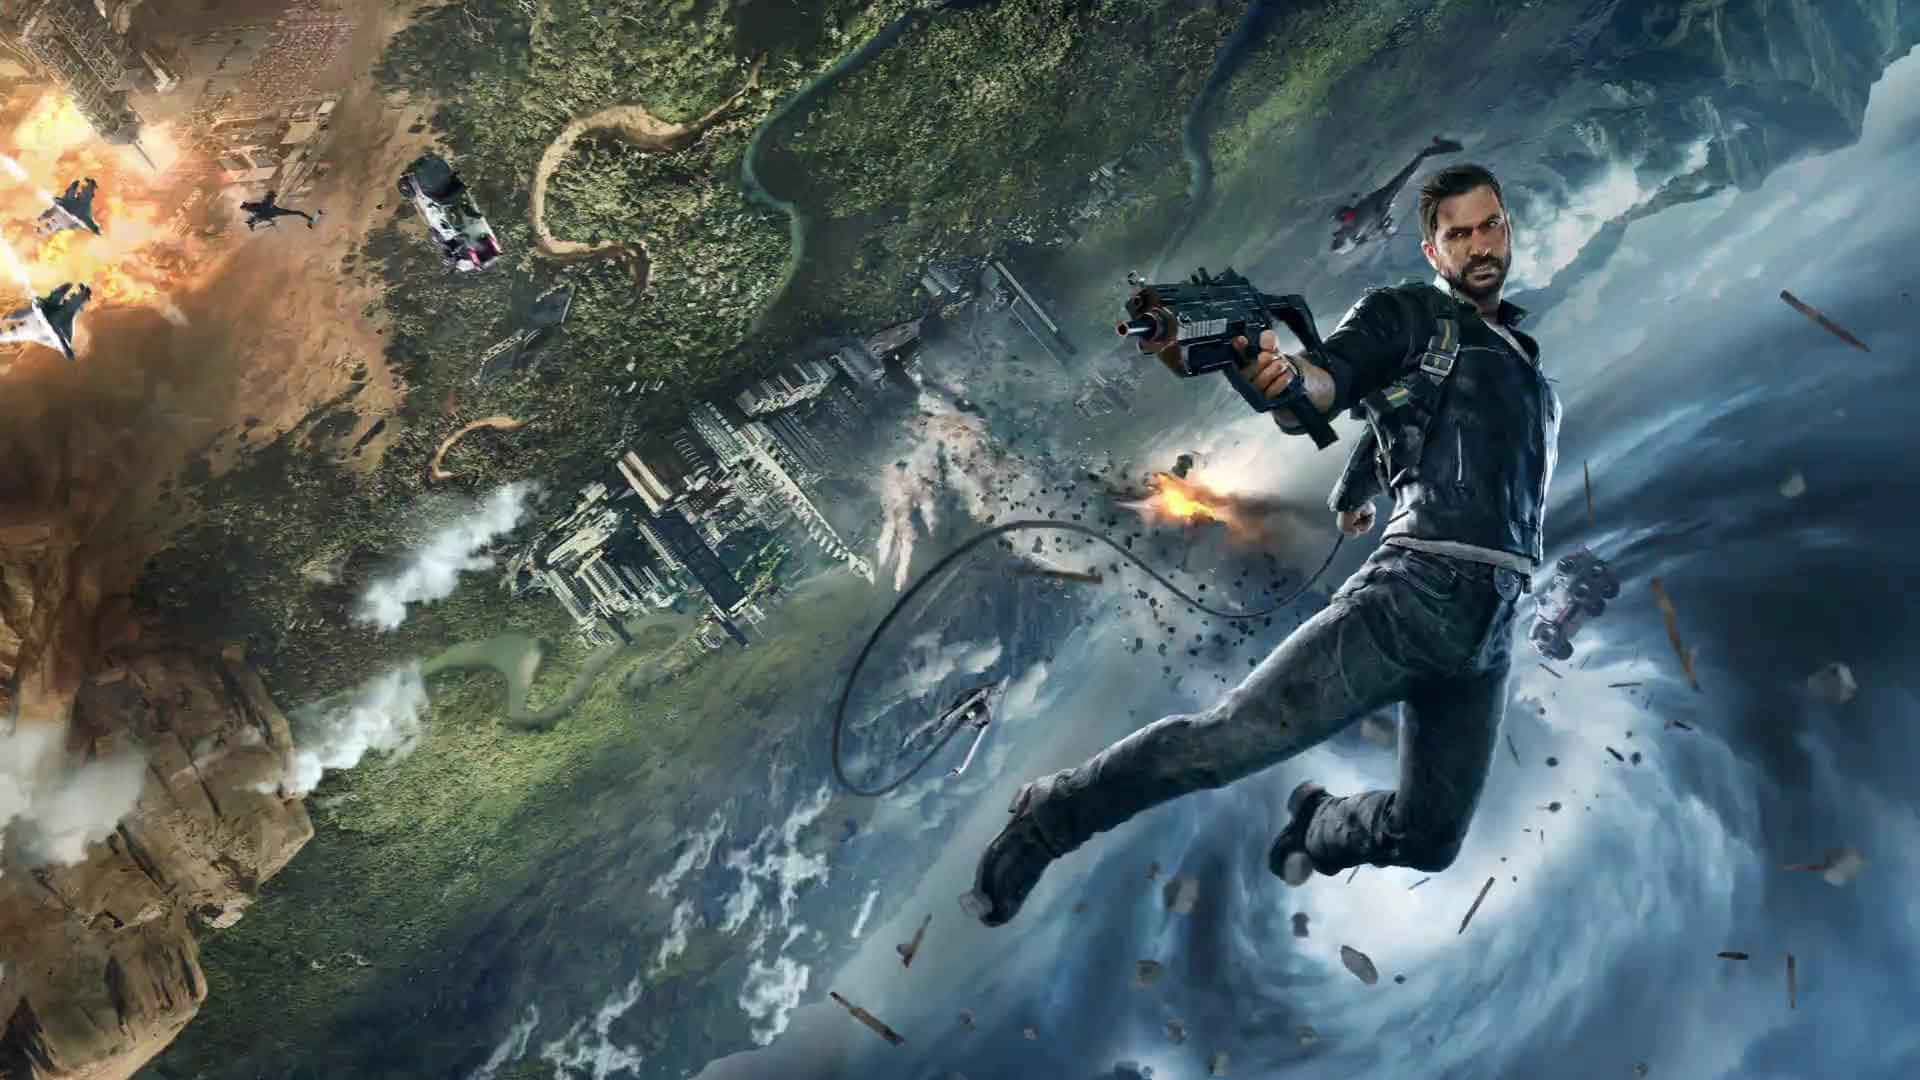 Epic Exploration Awaits In Just Cause 4